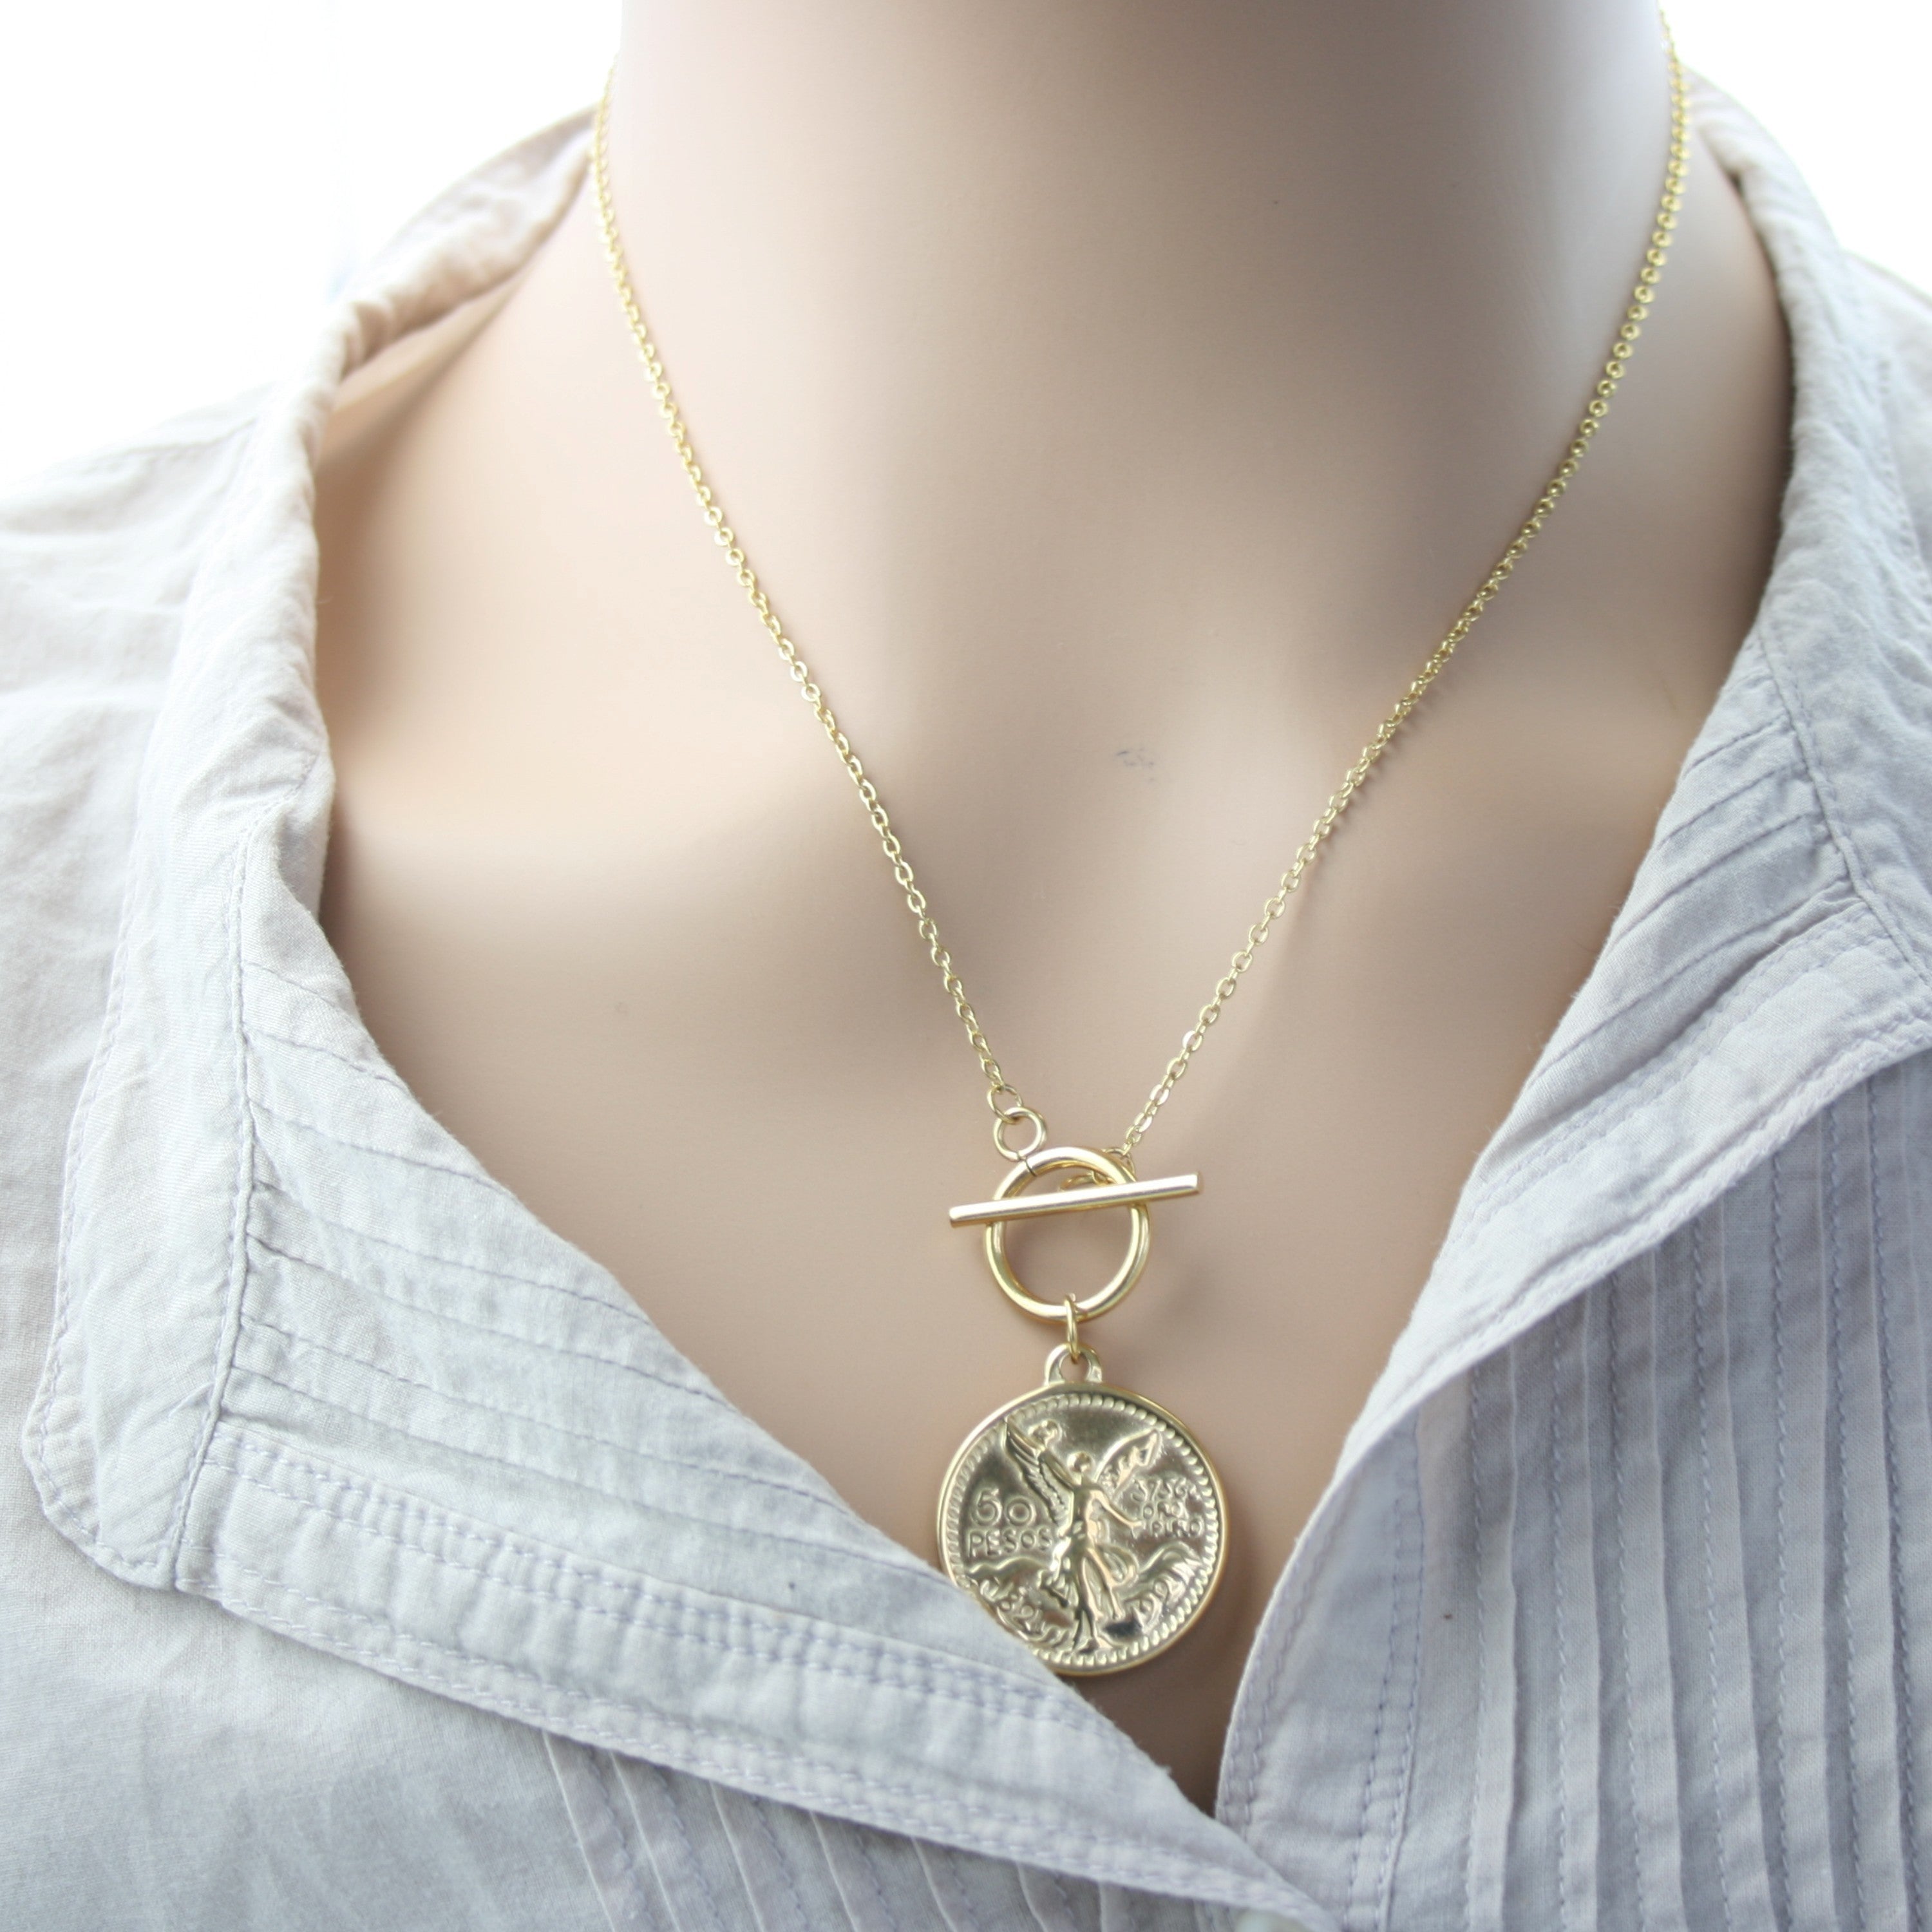 Stainless Steel Gold Tone Fob Coin Necklace